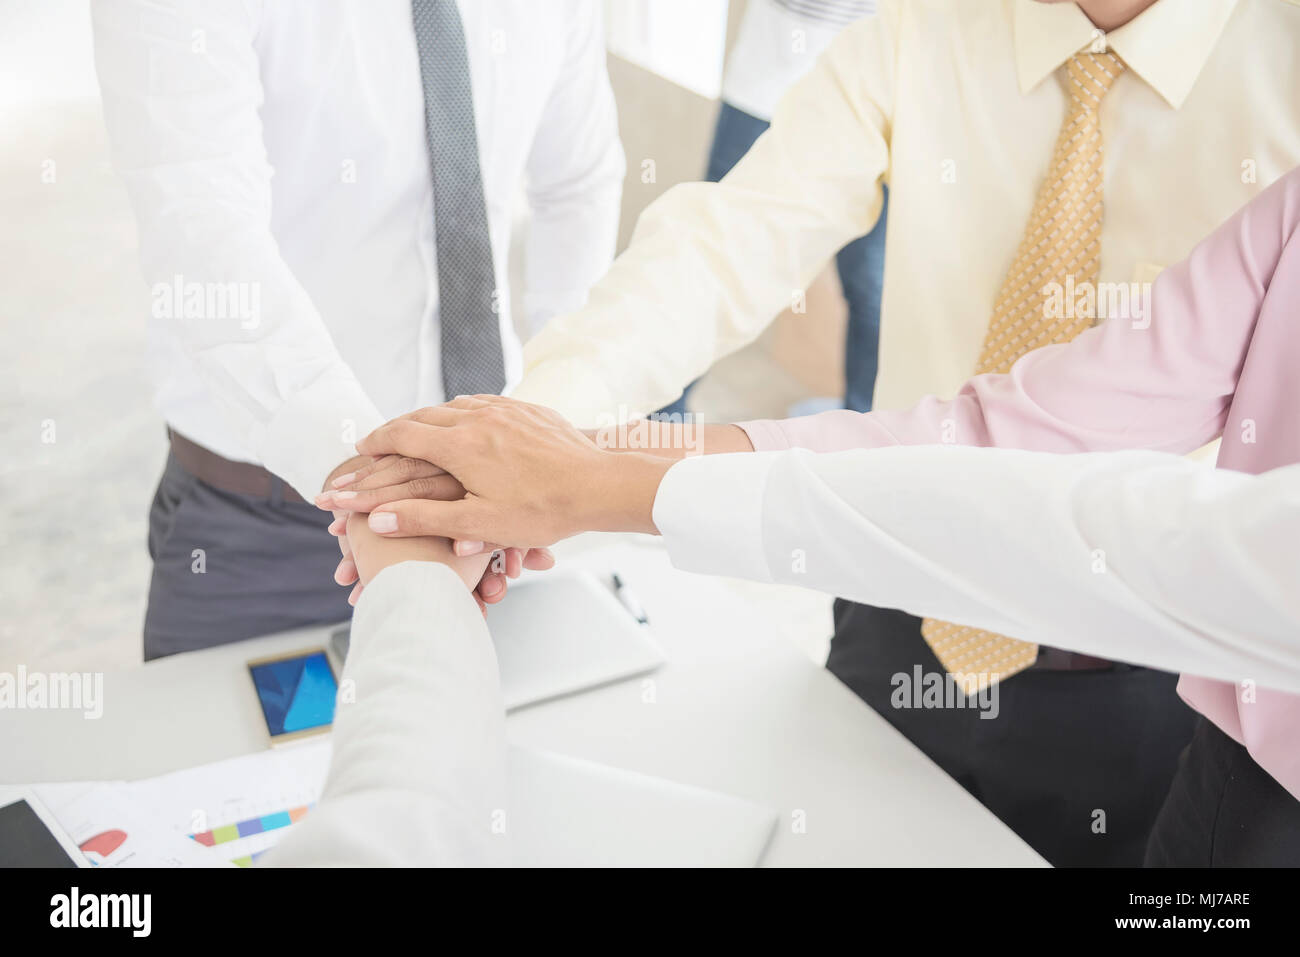 Business teamwork concept. Business people joining hands team spirit in workplace. Power to success. Picture for add text message. Backdrop for design Stock Photo